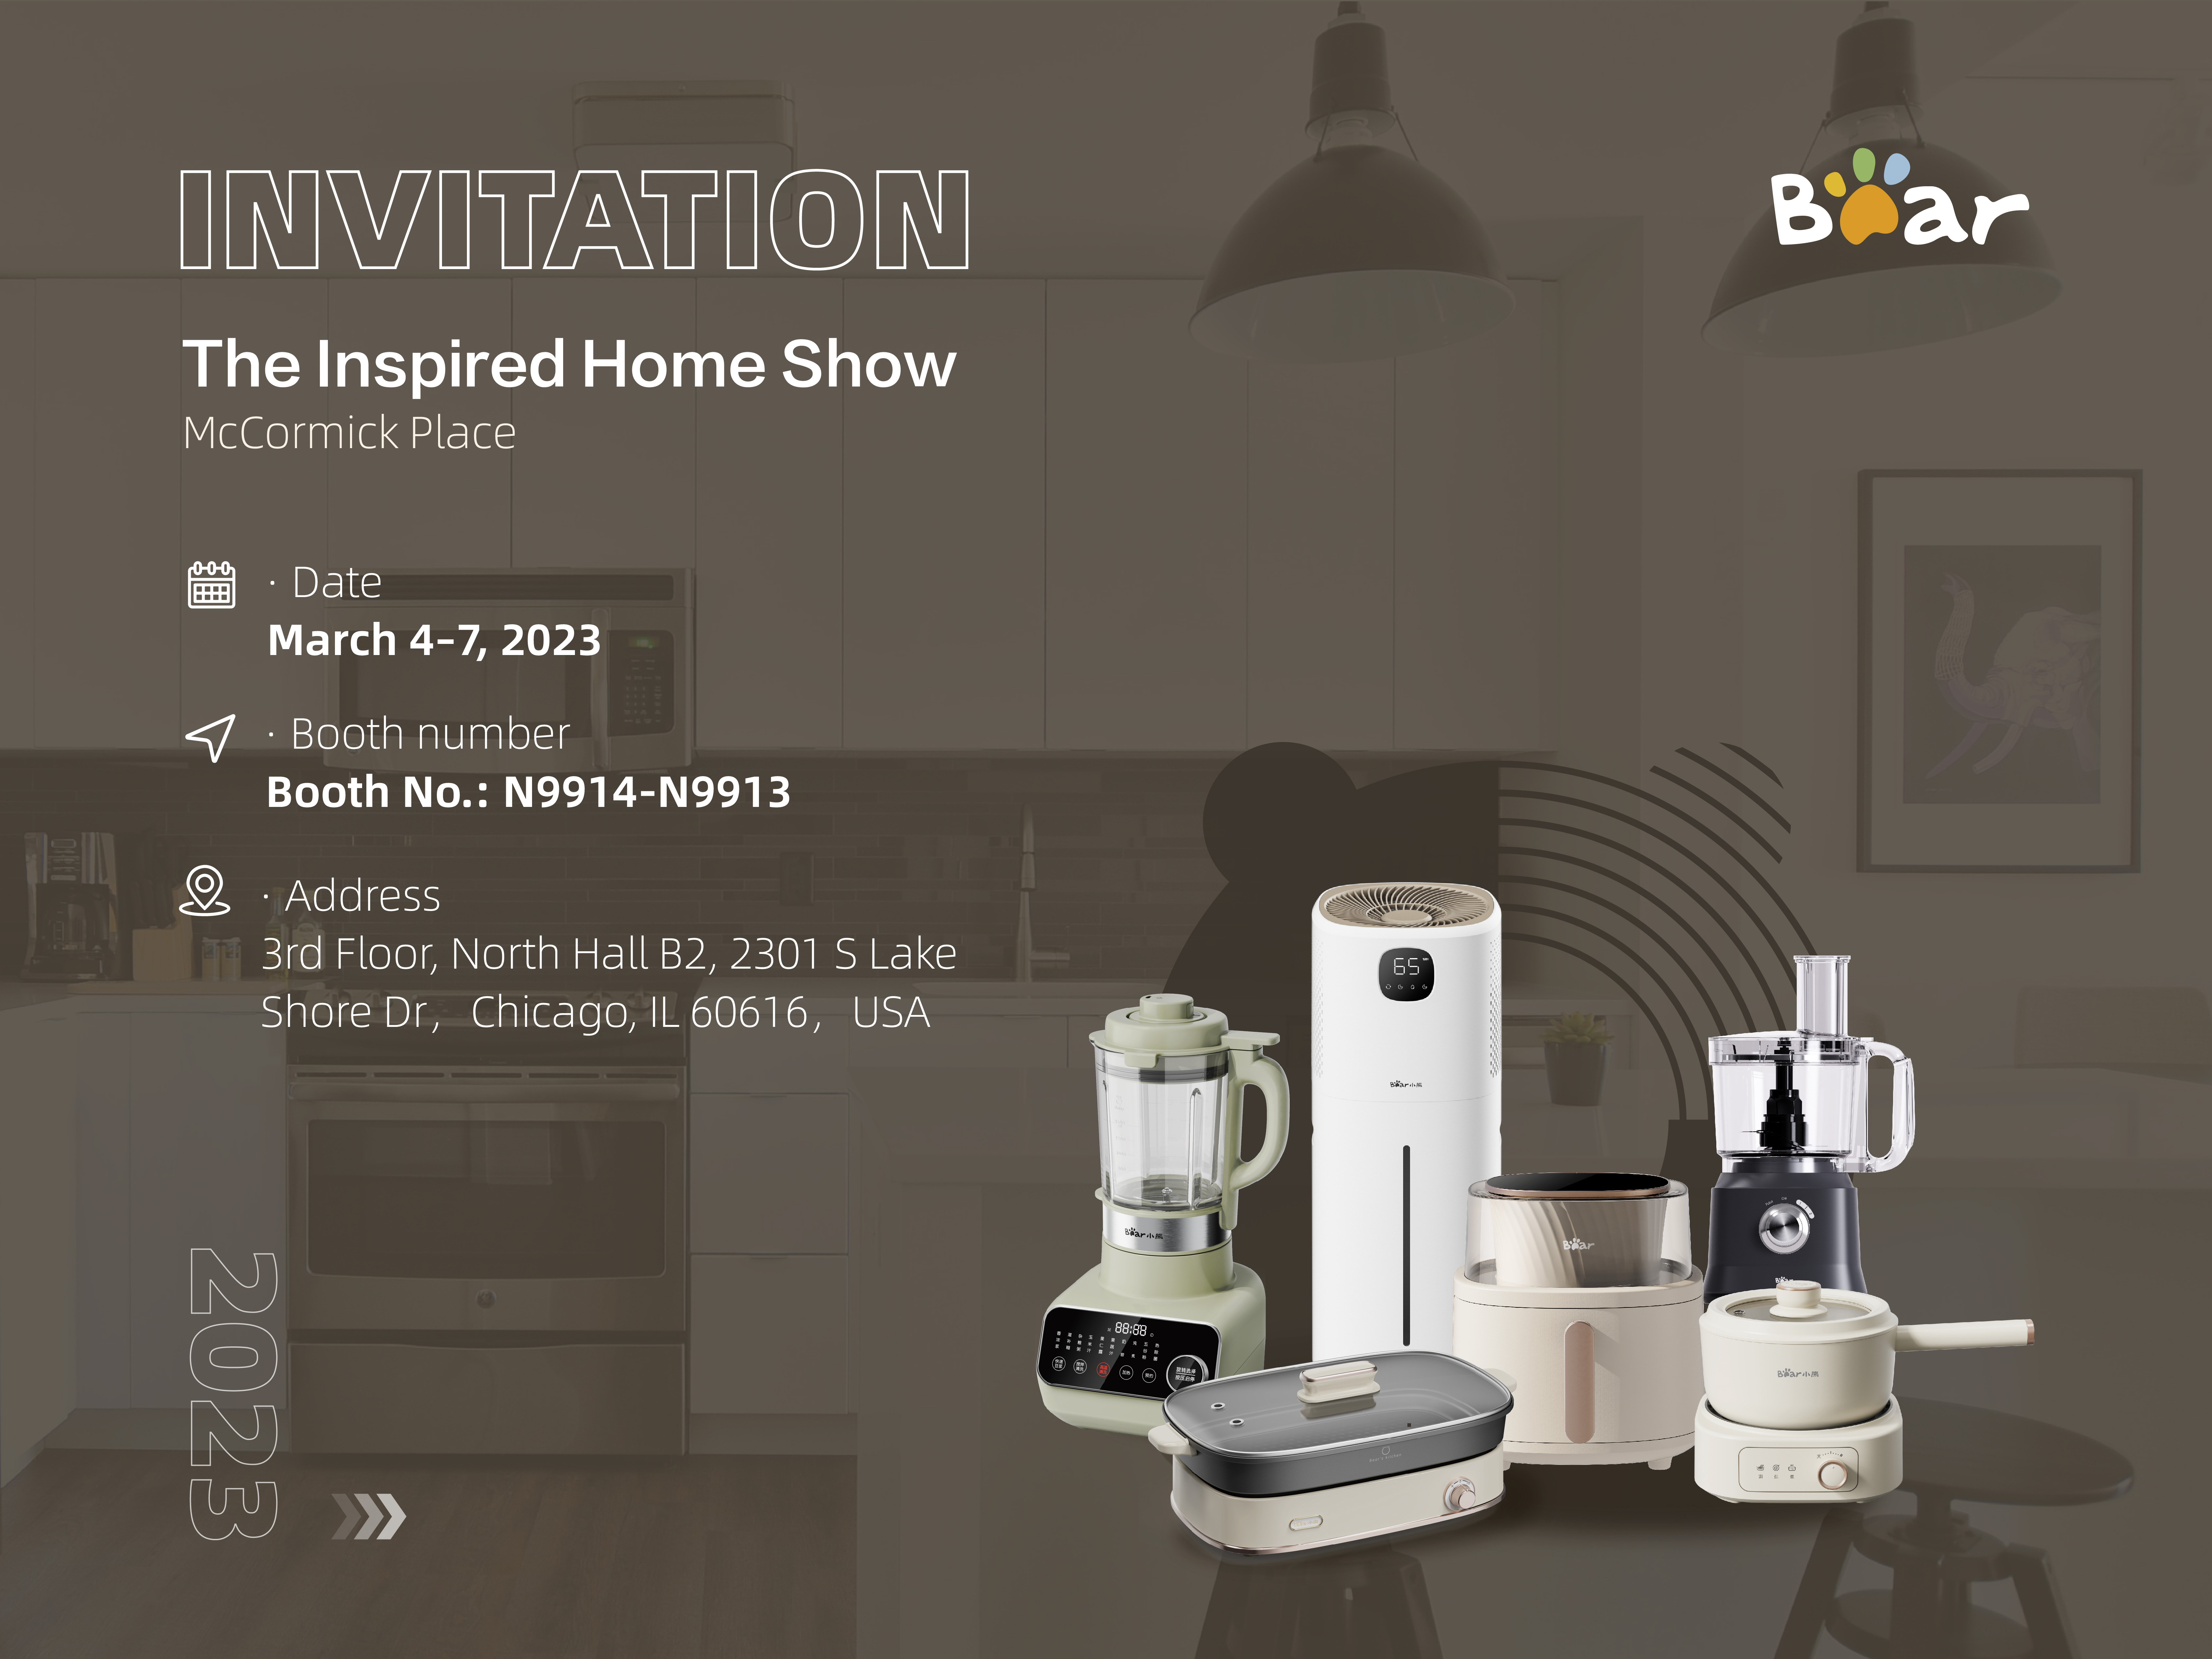 Bear will attend Inspired Home Show in Chicago, March 4th-7th